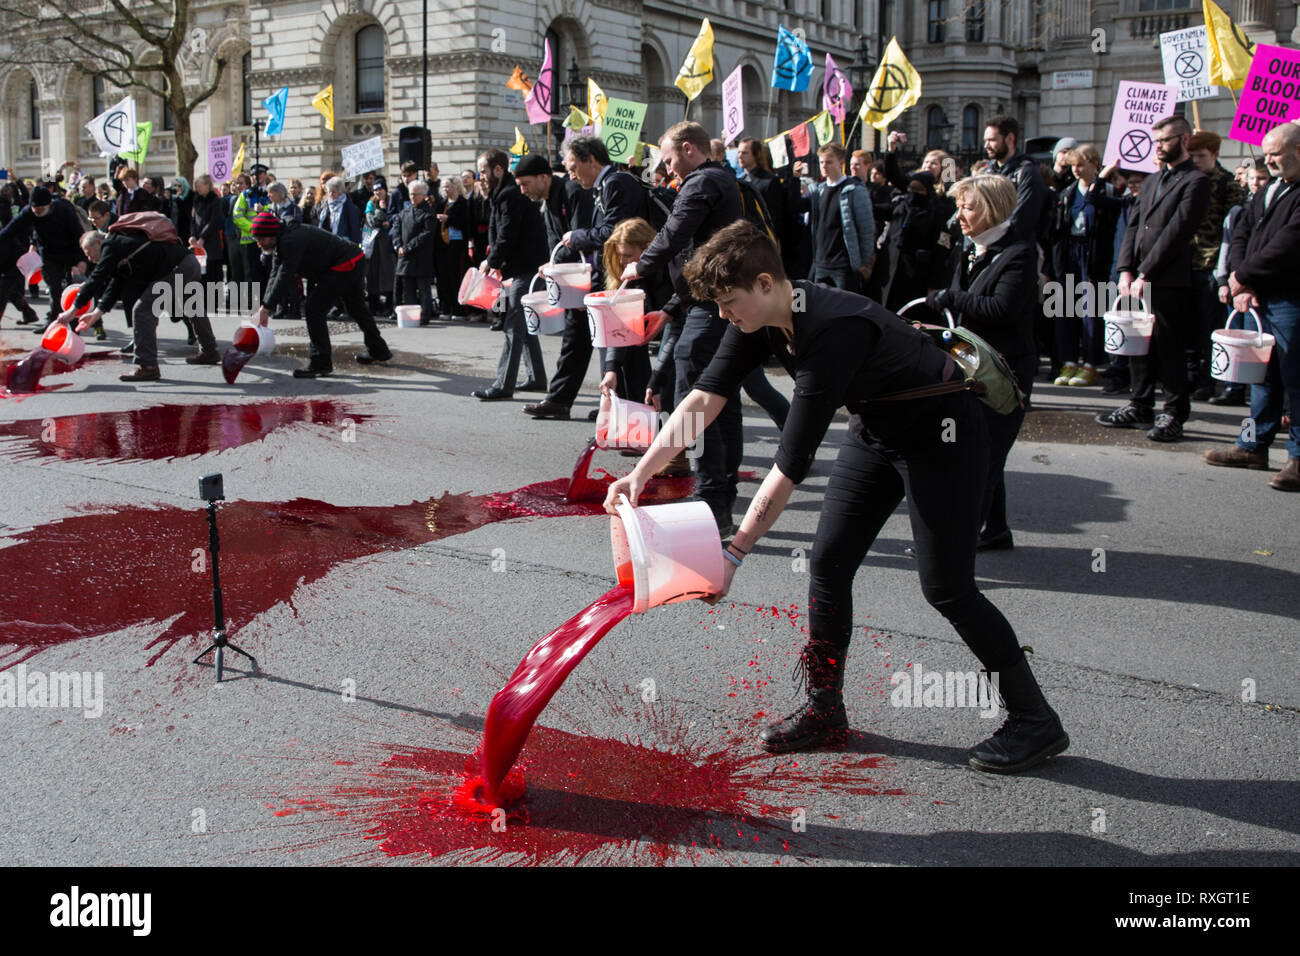 London, UK. 9th March, 2019. Climate activists from Extinction Rebellion pour artificial blood on the ground outside Downing Street as part of an act of civil disobedience named 'The Blood of Our Children' to call on the Government to take immediate steps to combat the current climate and ecological emergency. Stock Photo